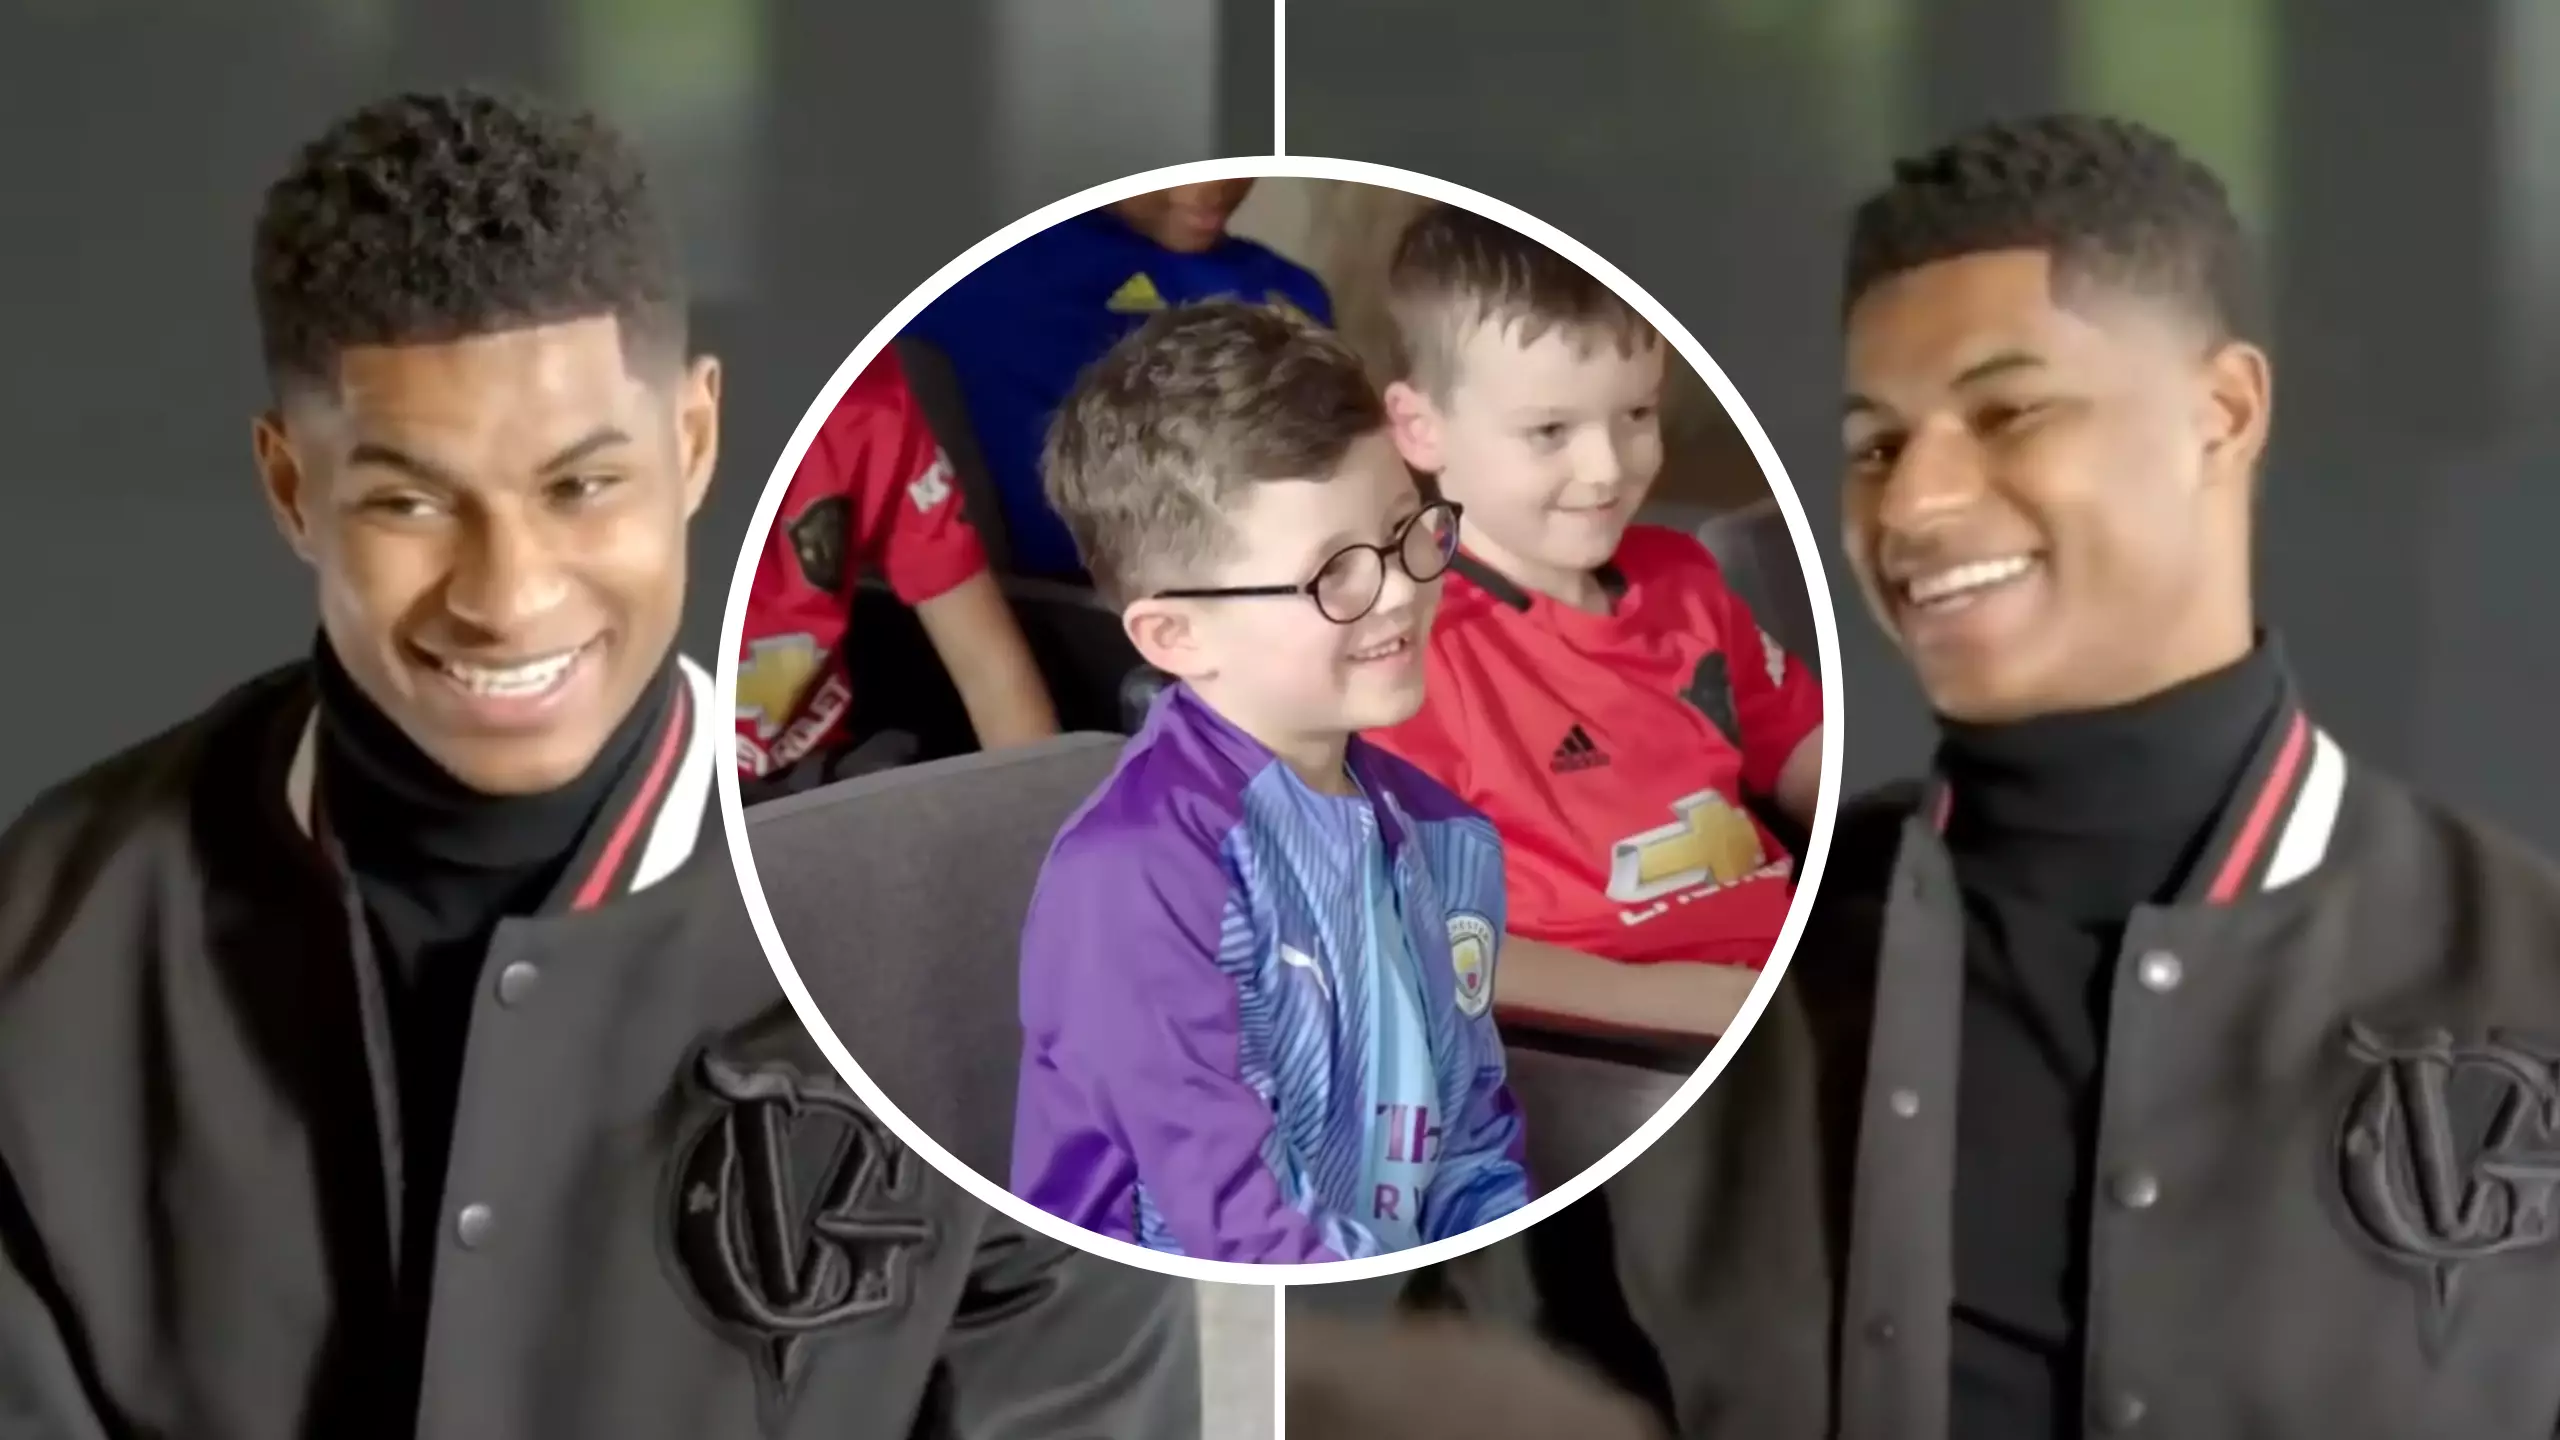 Marcus Rashford Being Interviewed By Children Is The Most Wholesome Thing You'll Ever Watch